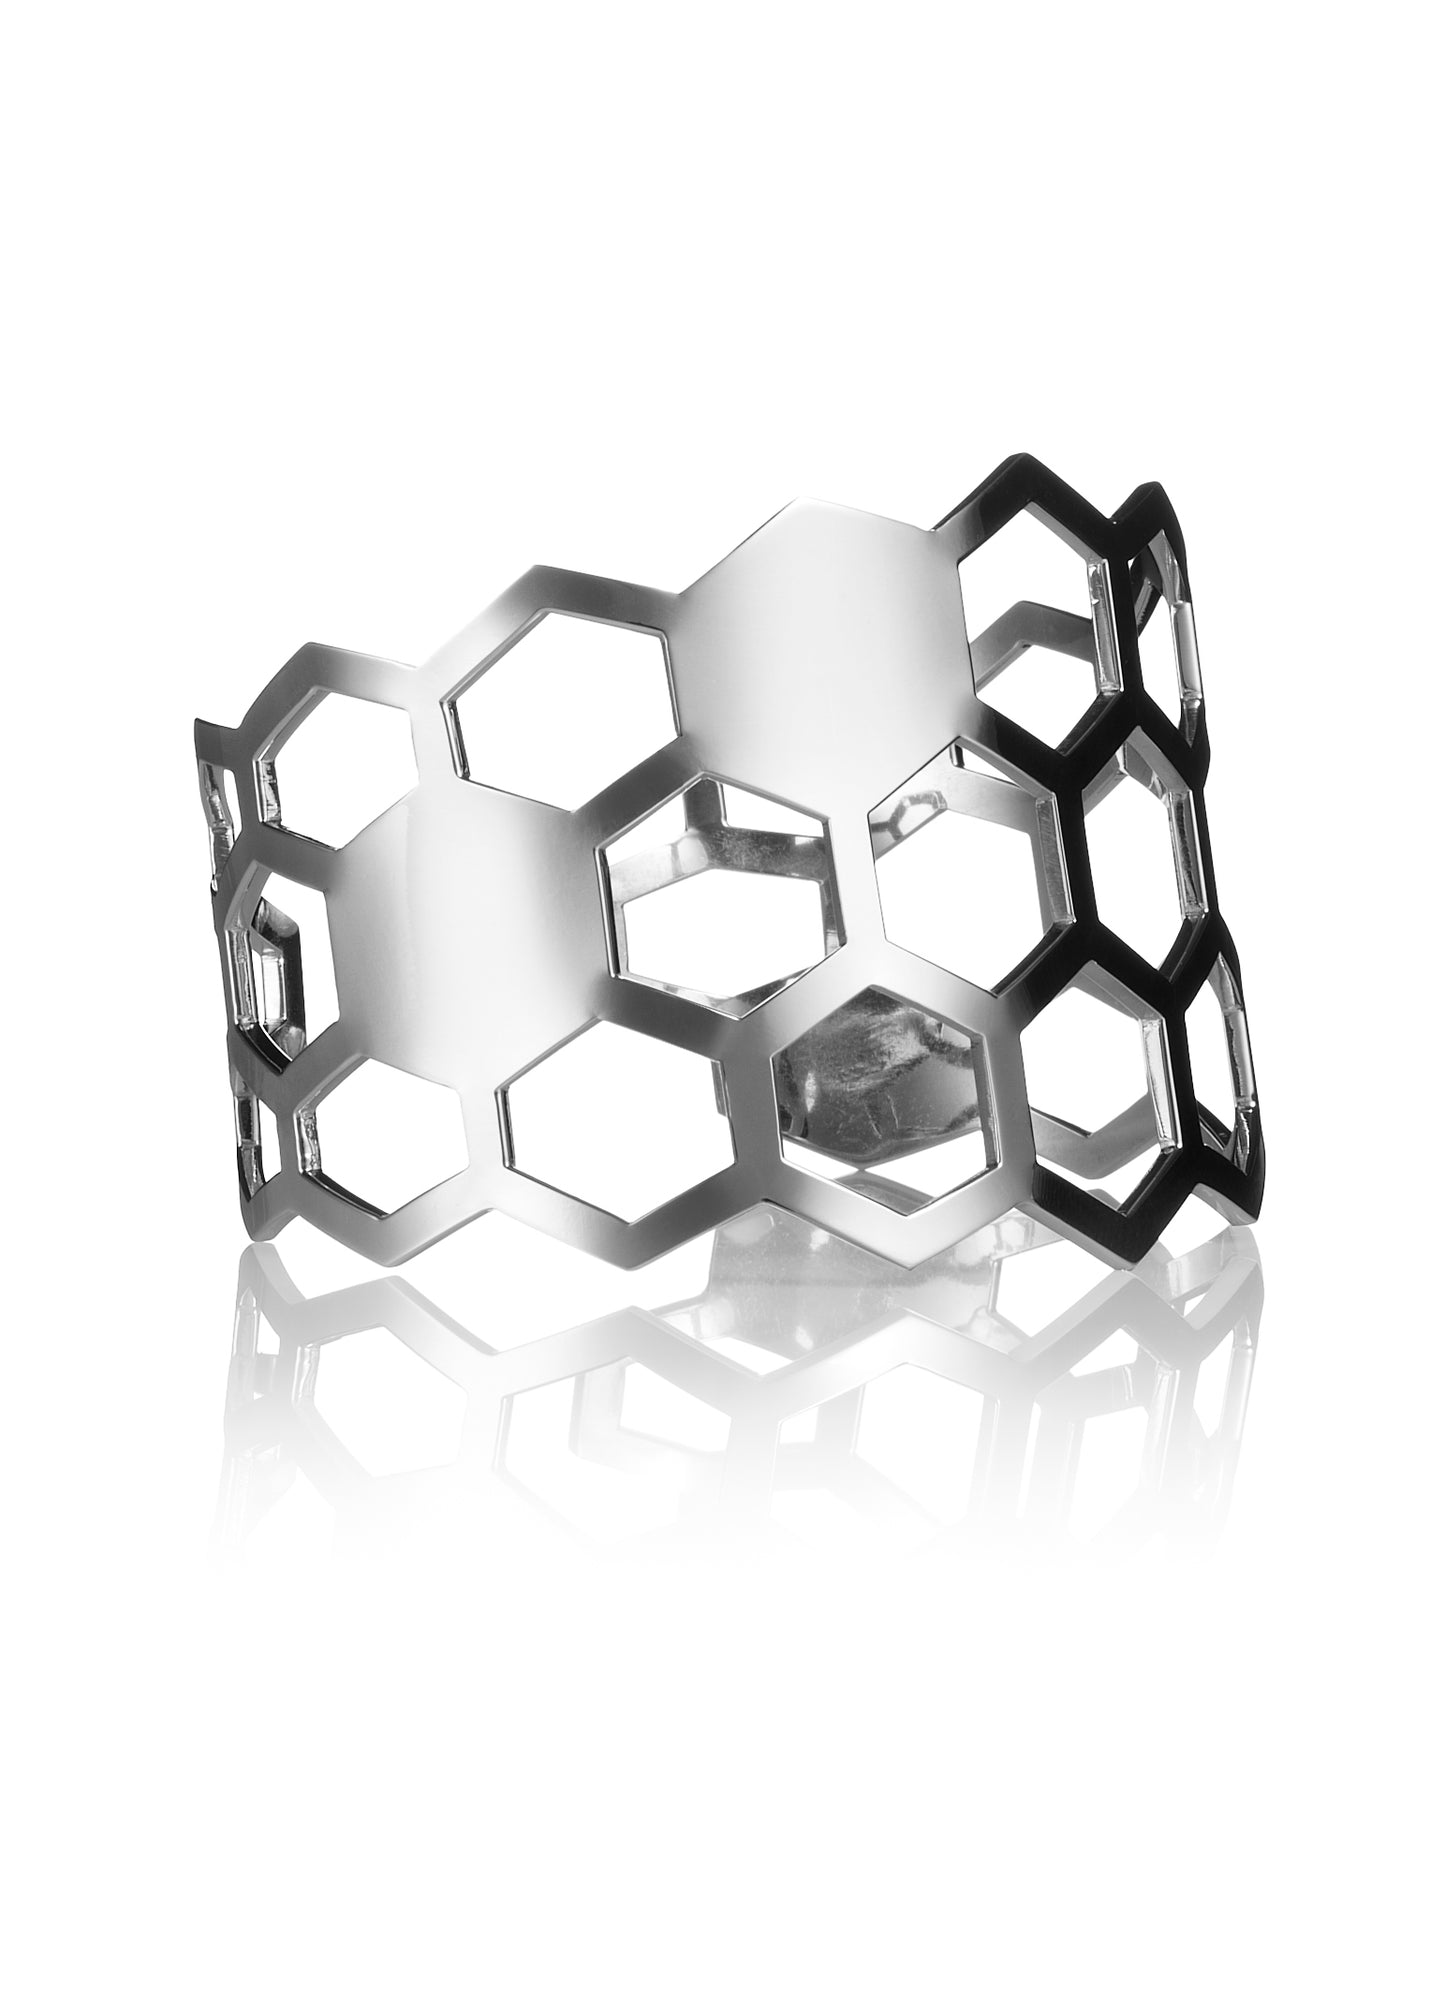 Bestselling chunky geometric cuff bracelet from Cell collection. This is one of the most iconic contemporary designer pieces by David&Martin.   Material: 925 silver. Size: adjustable, fits any wrist. 